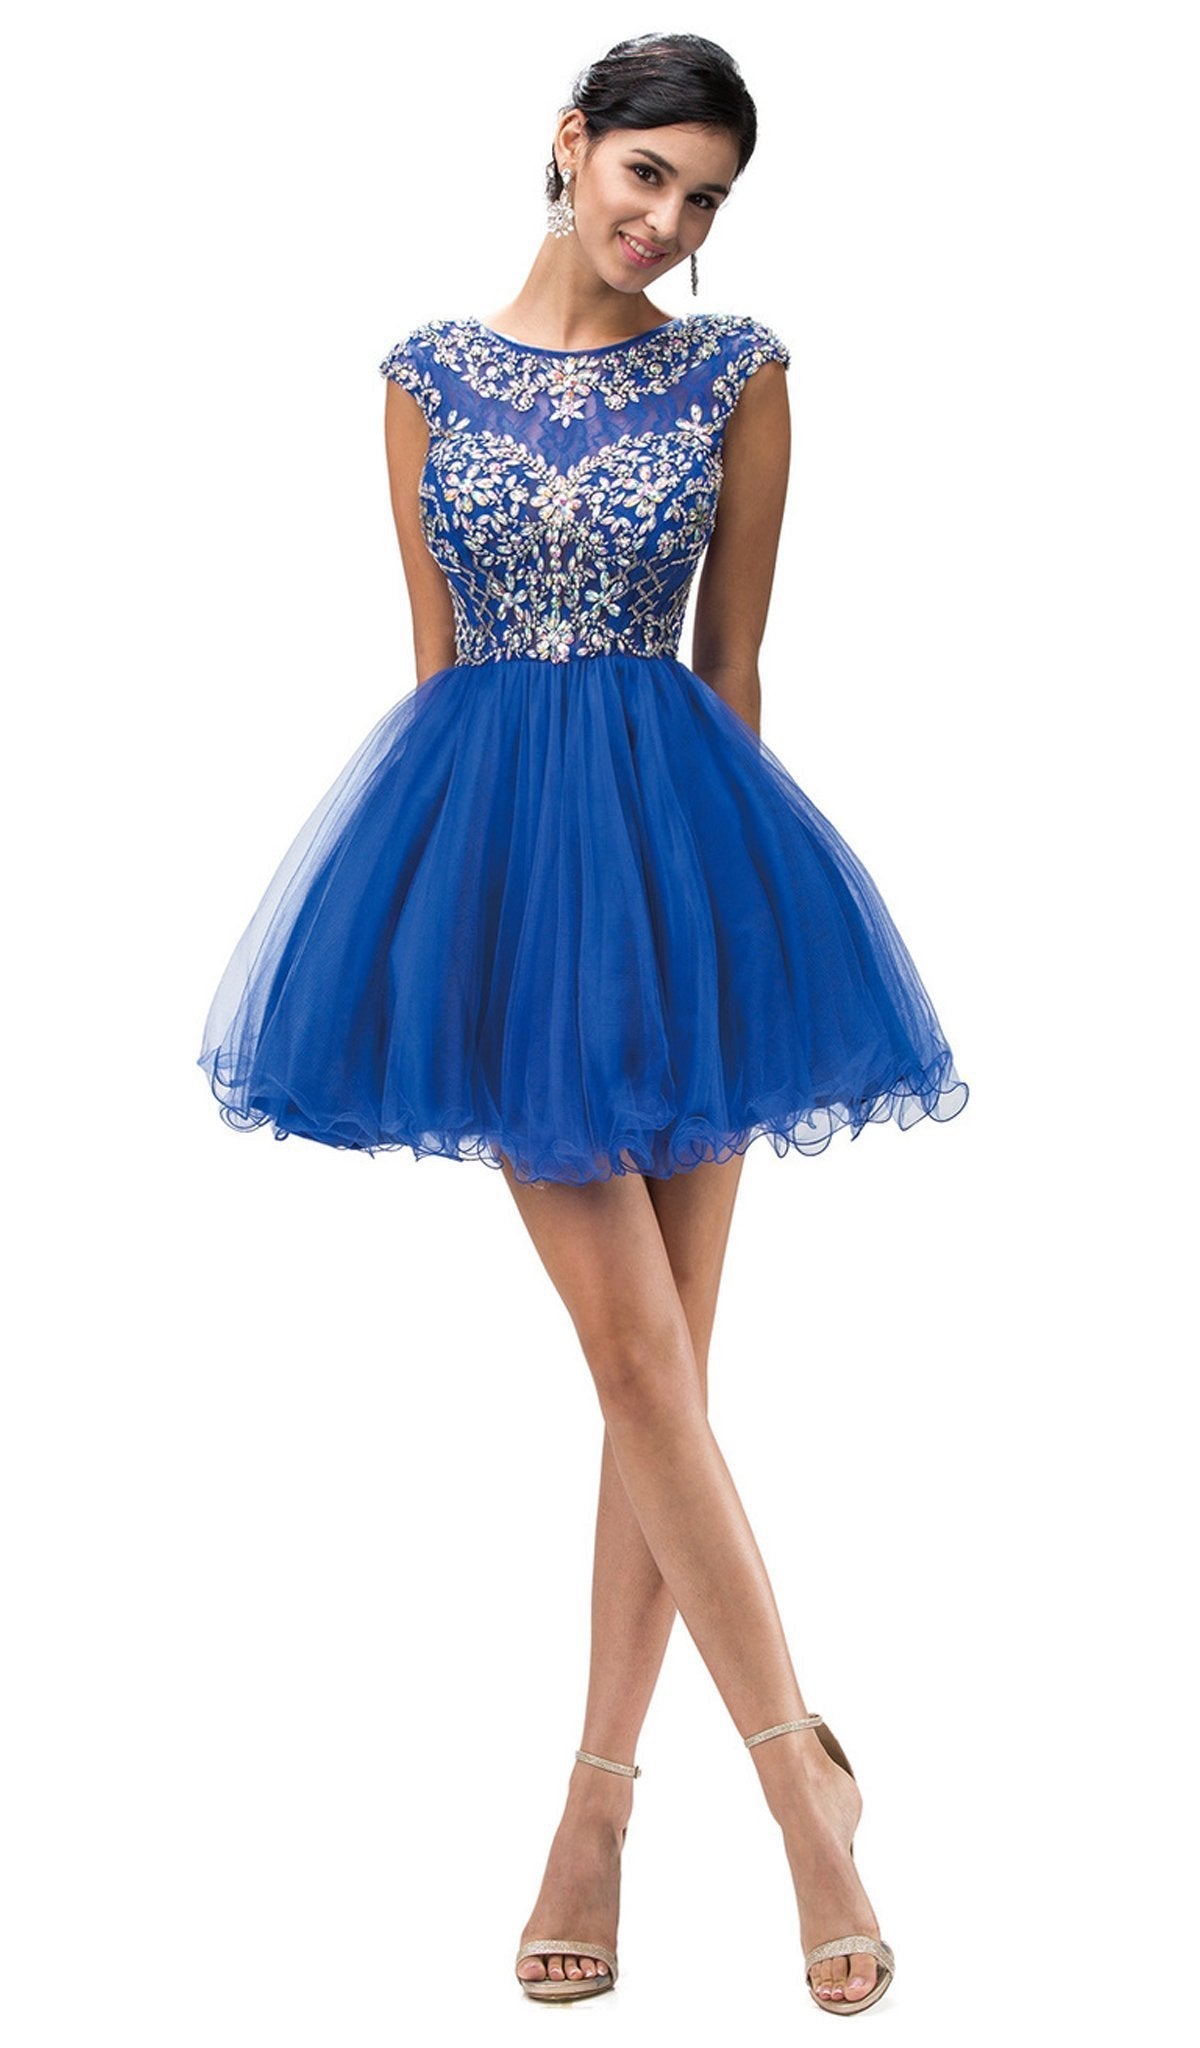 Dancing Queen - 9149 Cap Sleeve Crystal Beaded Cocktail Dress Party Dresses XS / Royal Blue